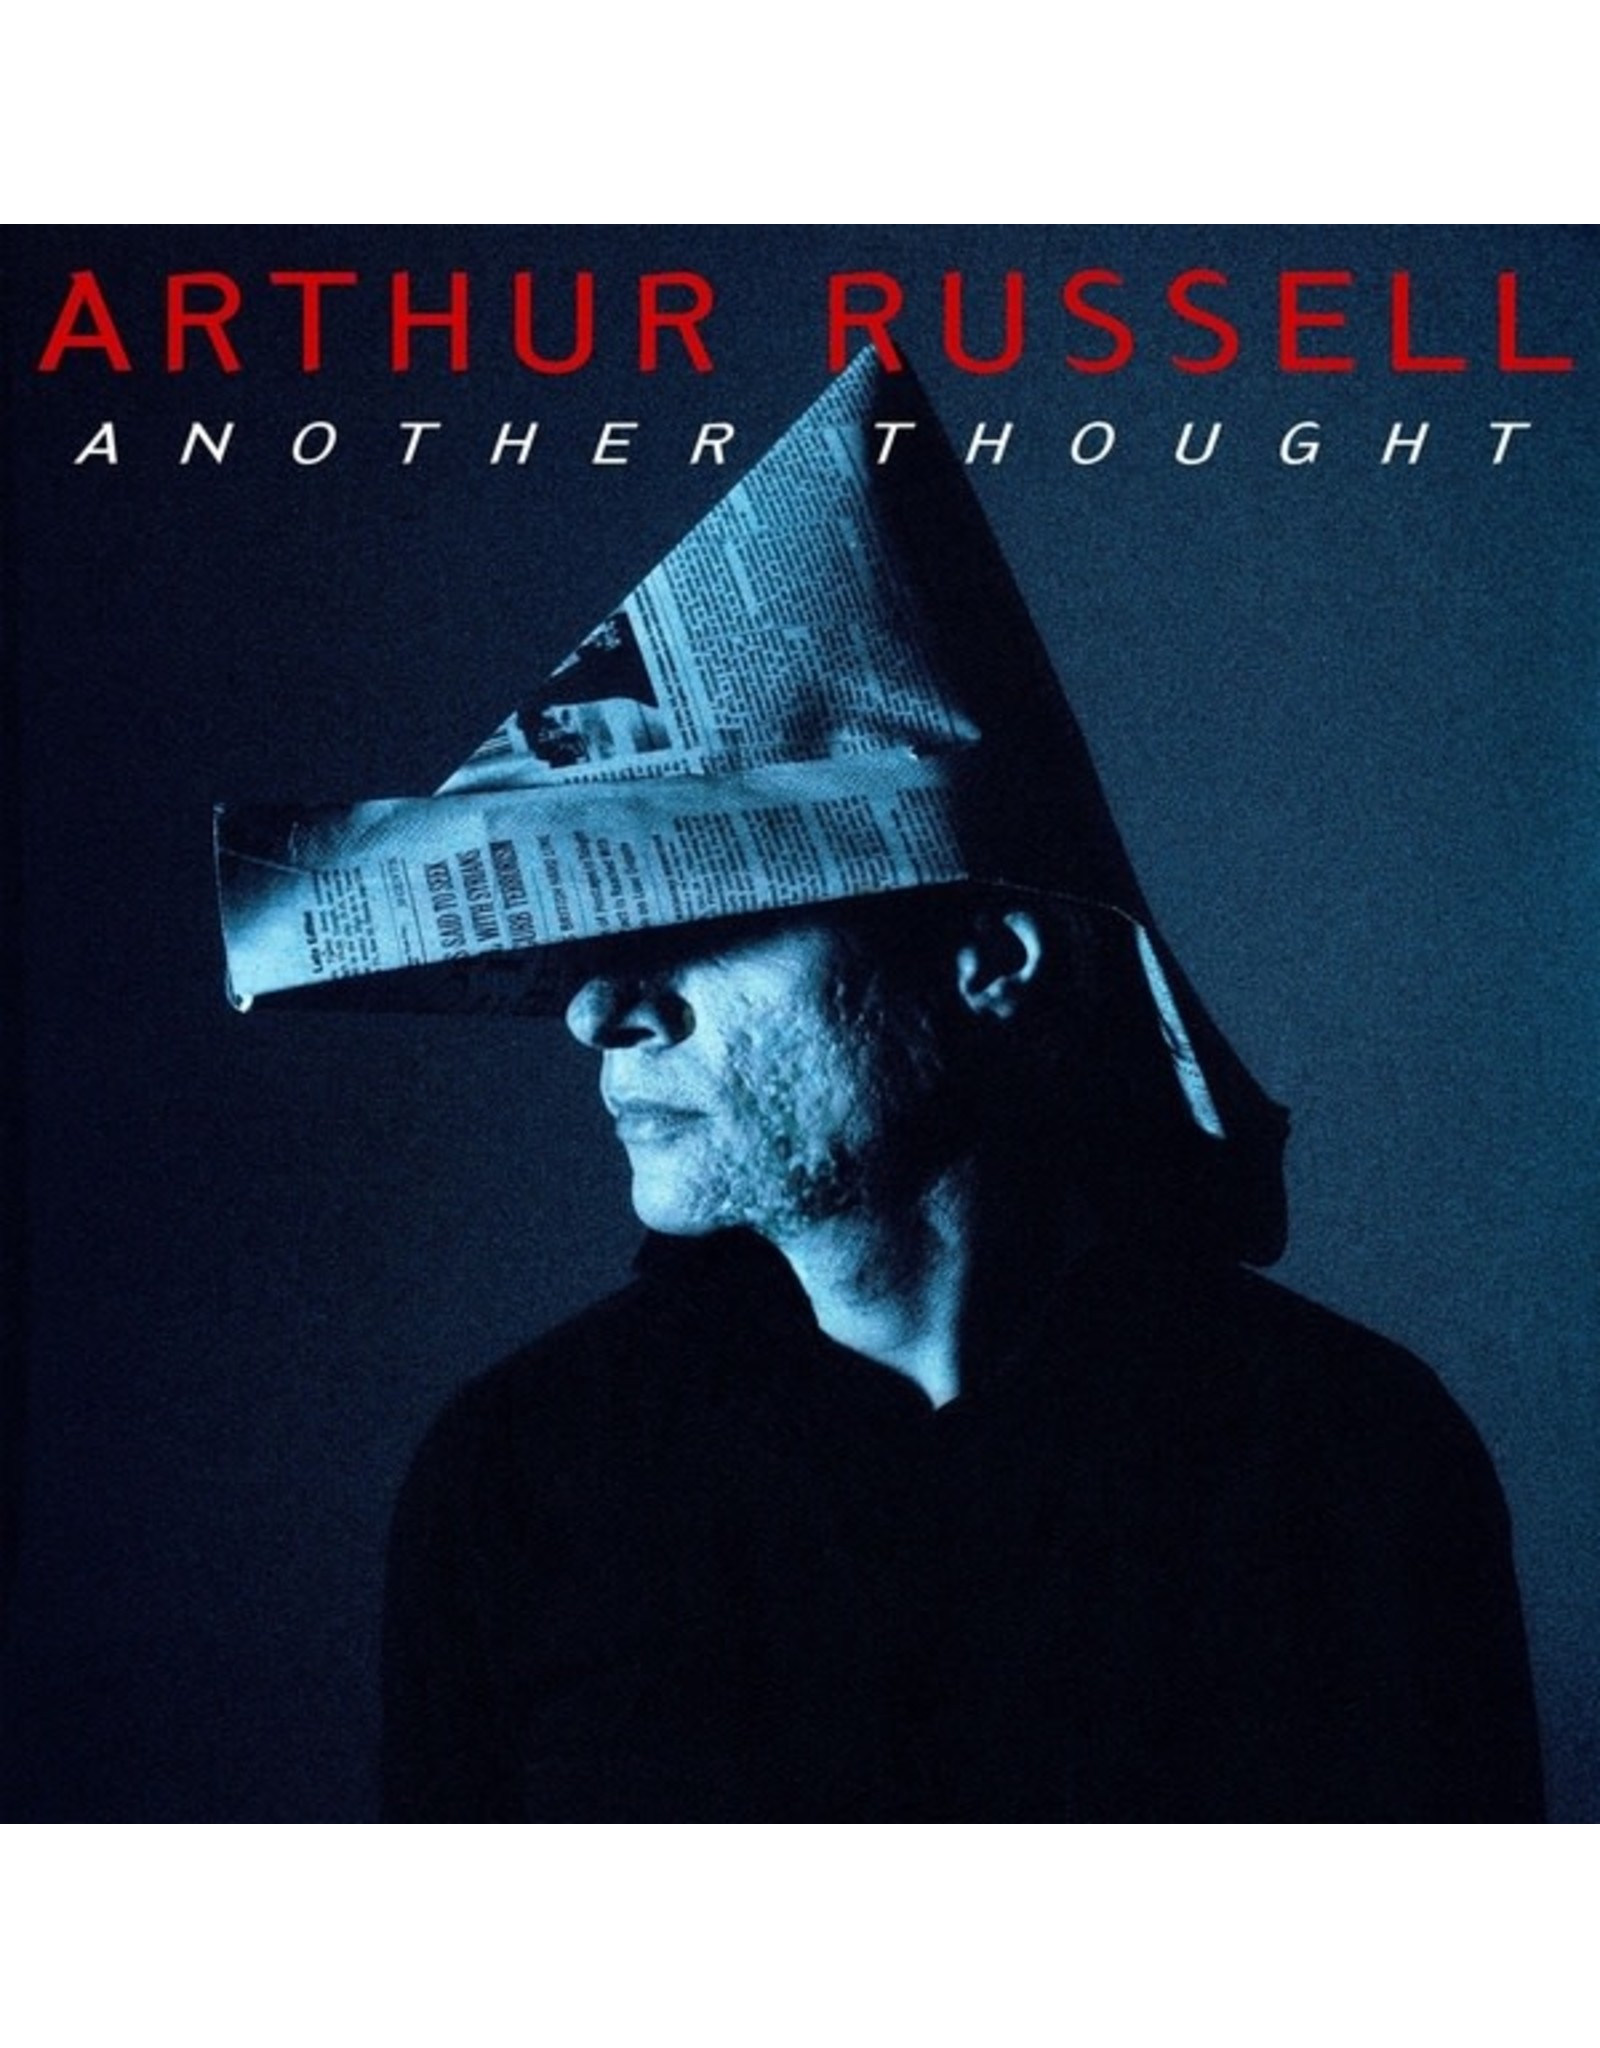 New Vinyl Arthur Russell - Another Thought 2LP